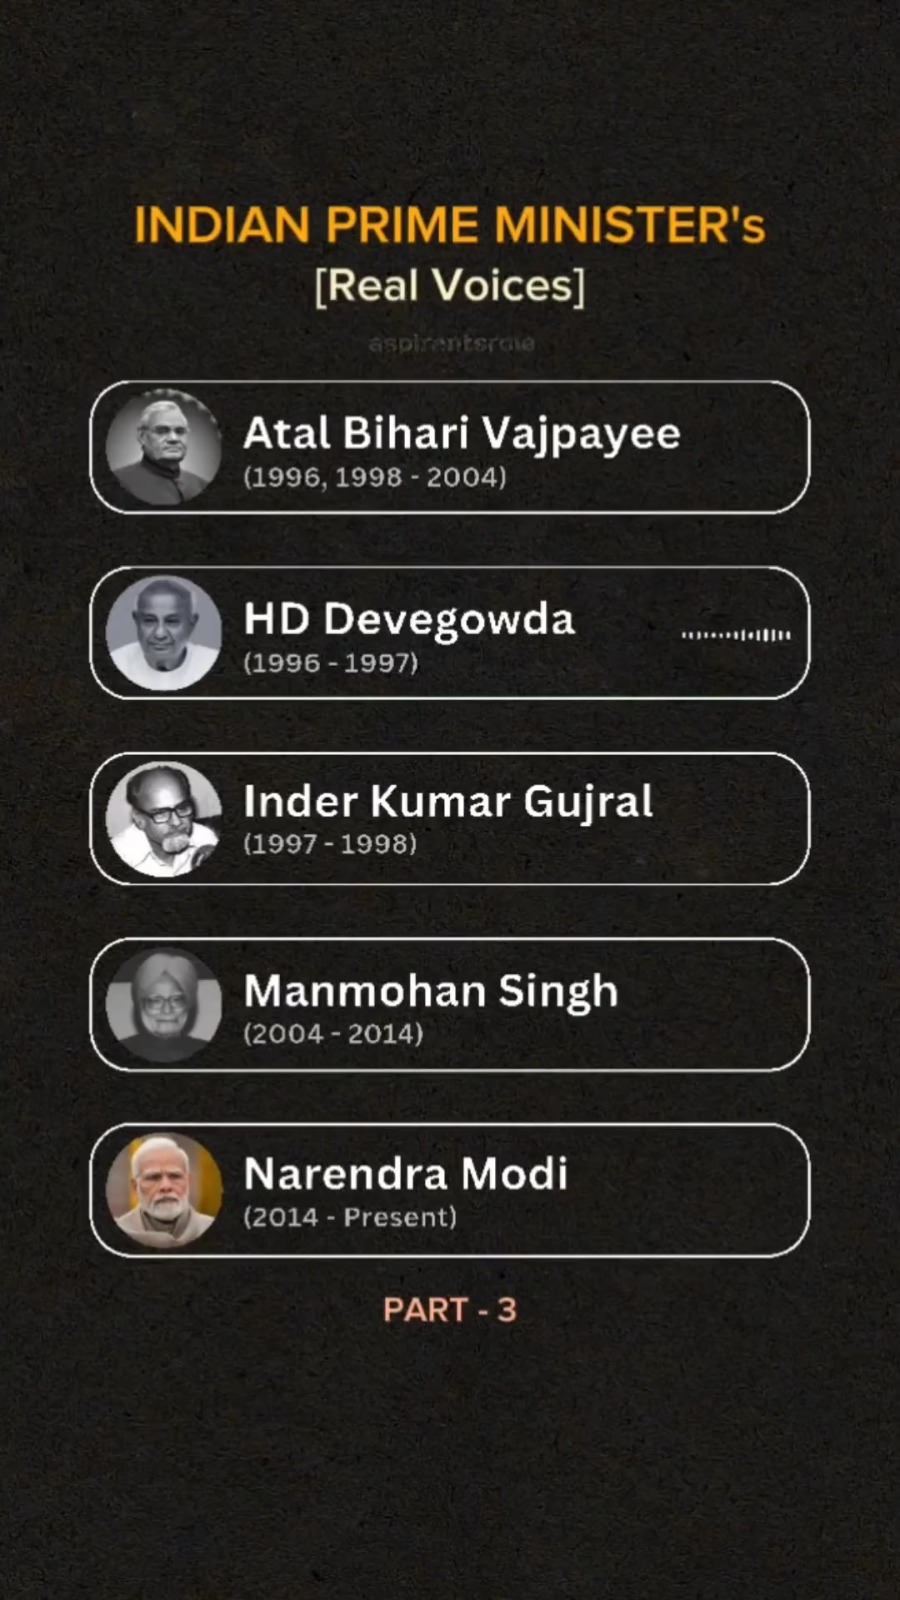 Real Voices of Indian PM’s 🎙️